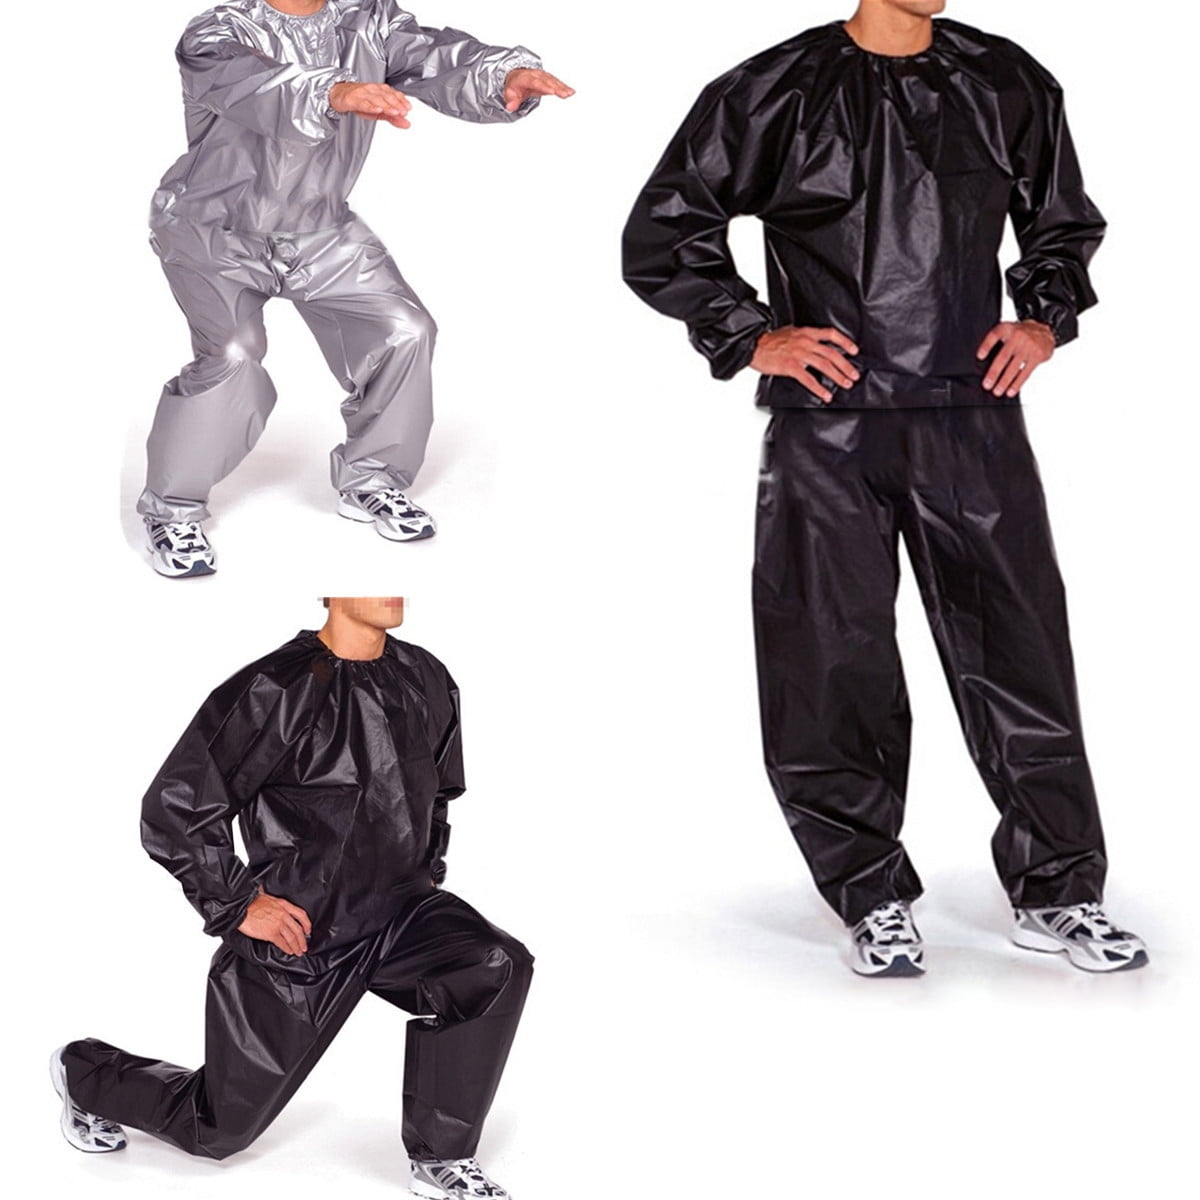 L-3XL Heavy Duty Sweat Suit Sauna Exercise Gym Fitness Weight Loss For Men Women 